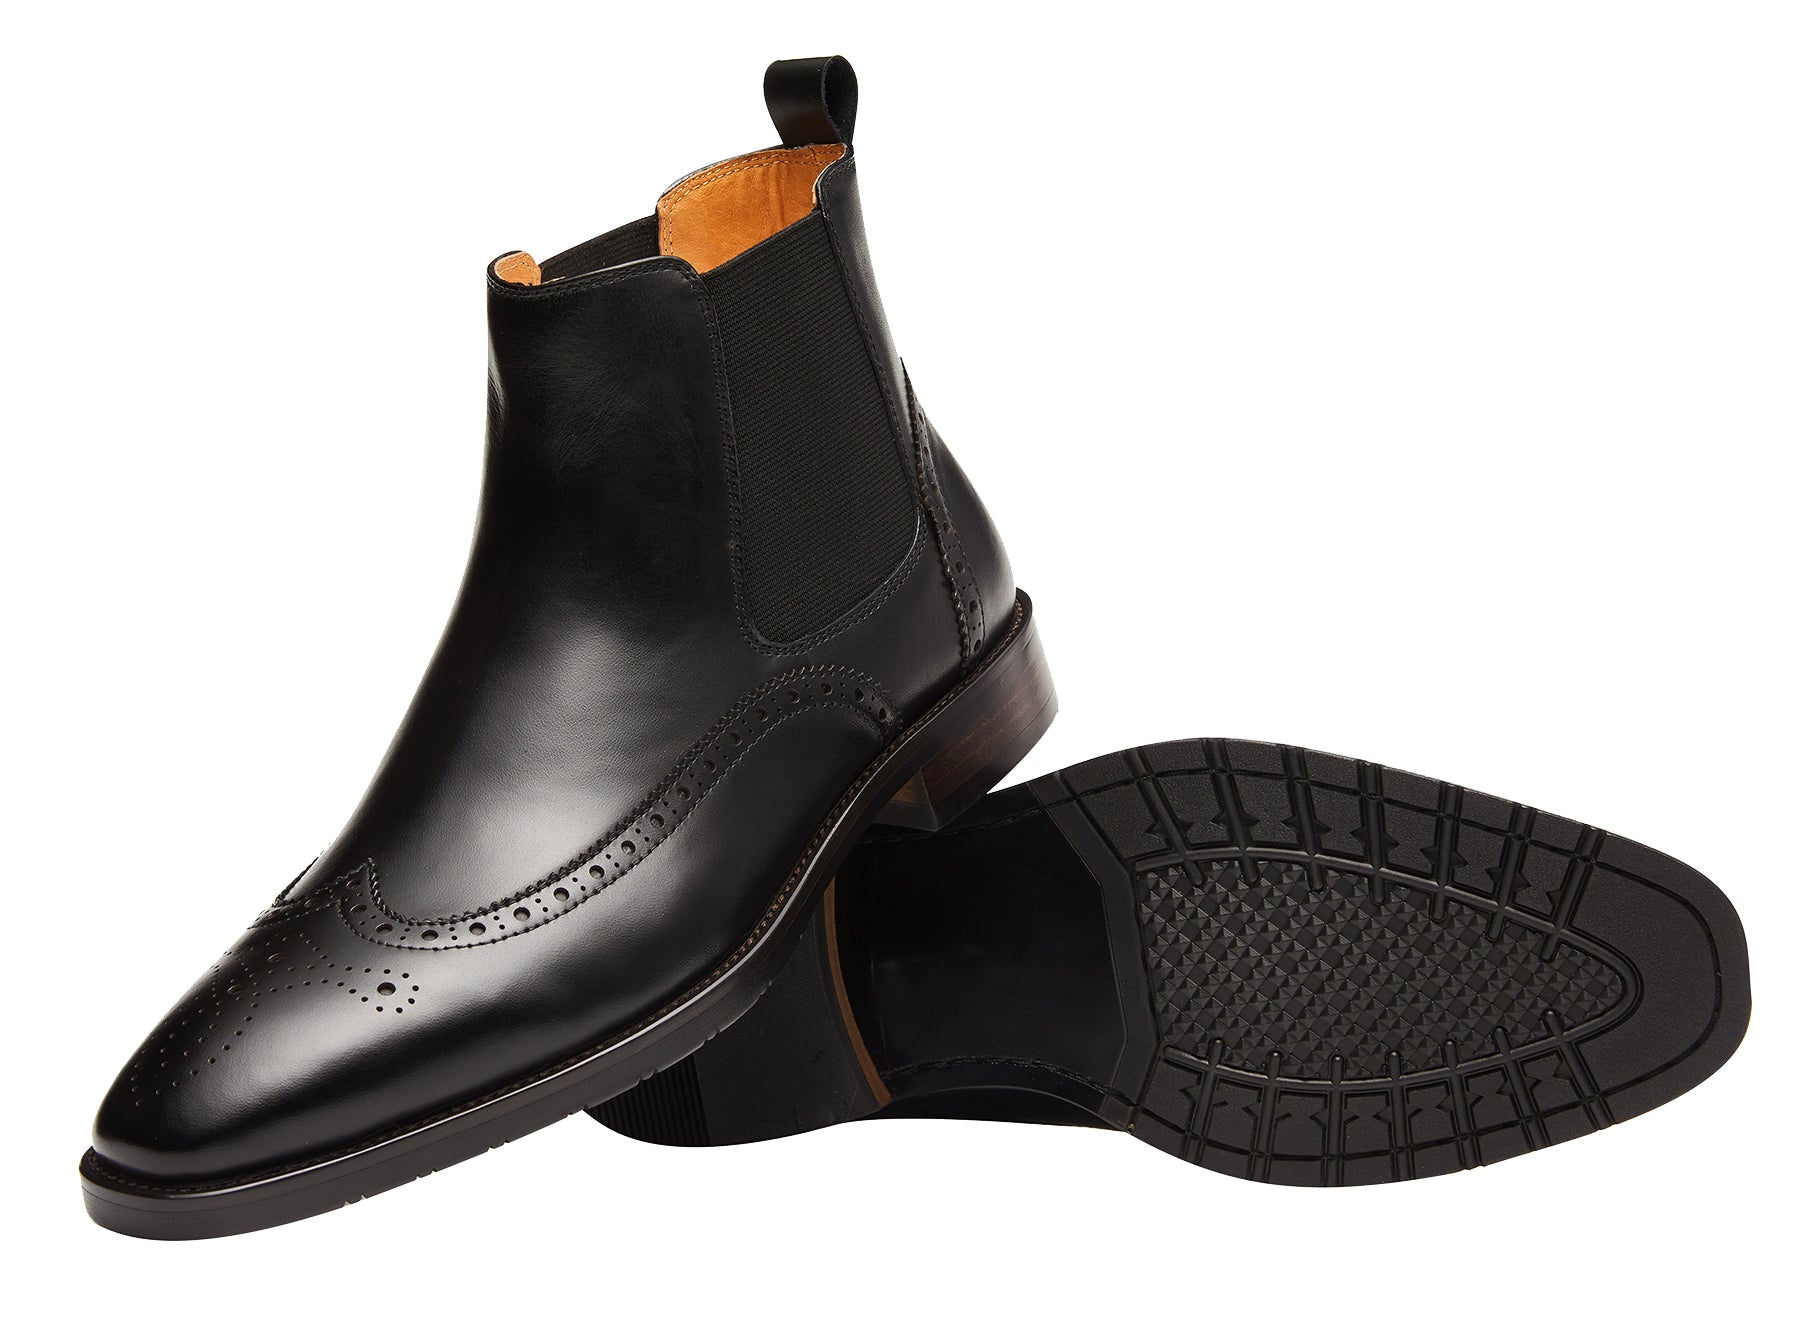 Men's Leather Fashion Classic Chelsea Boots